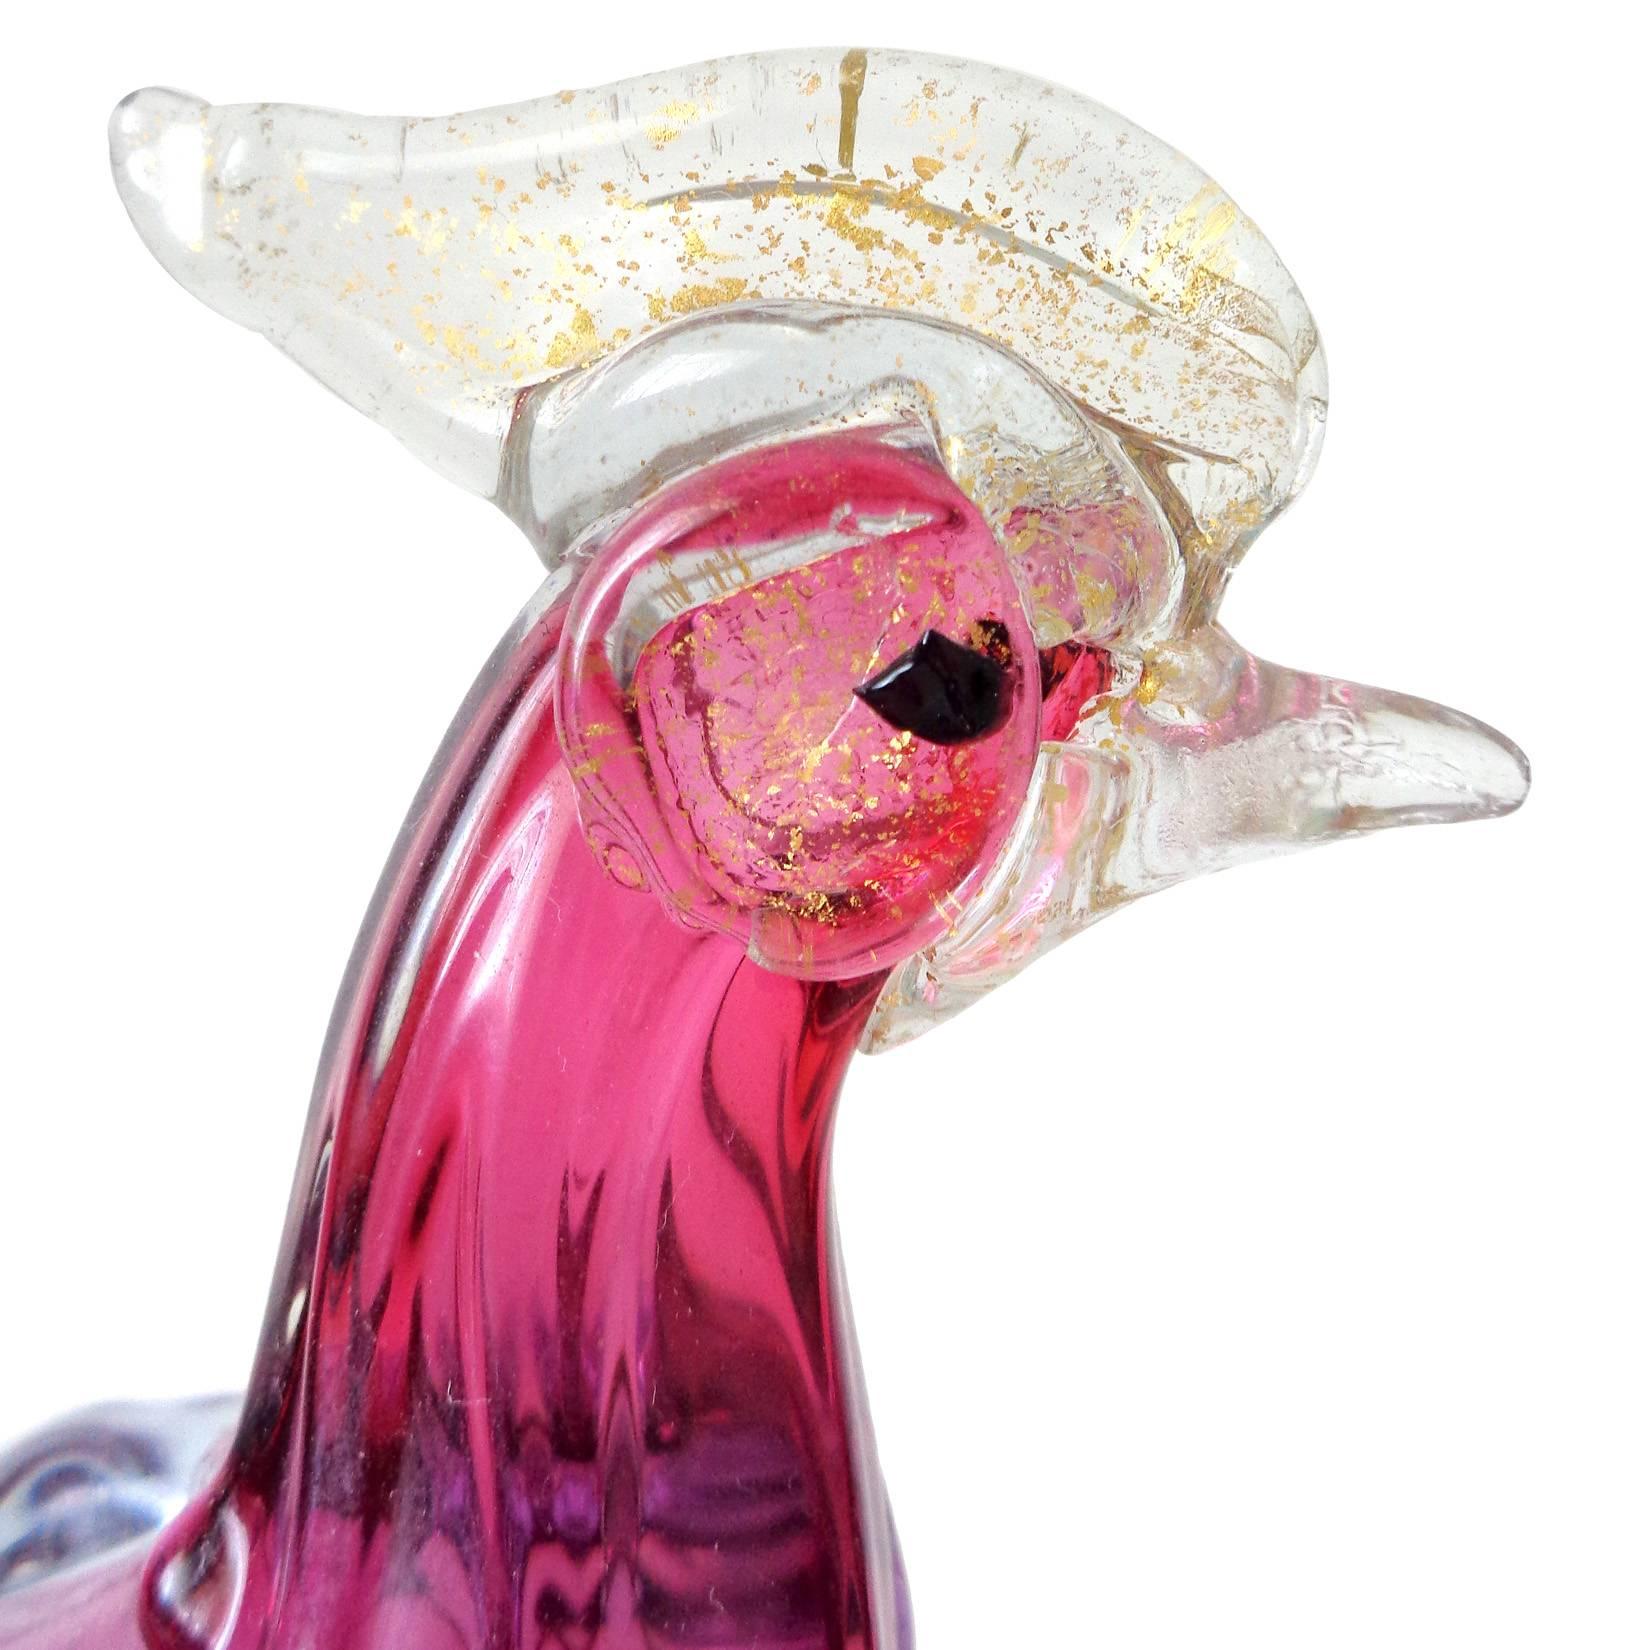 Free shipping worldwide! See details below description.

Beautiful Murano handblown Sommerso purple and gold flecks art glass pheasant bird sculpture. Documented to designer Alfredo Barbini. The base has two gold leafs and ice blue color.